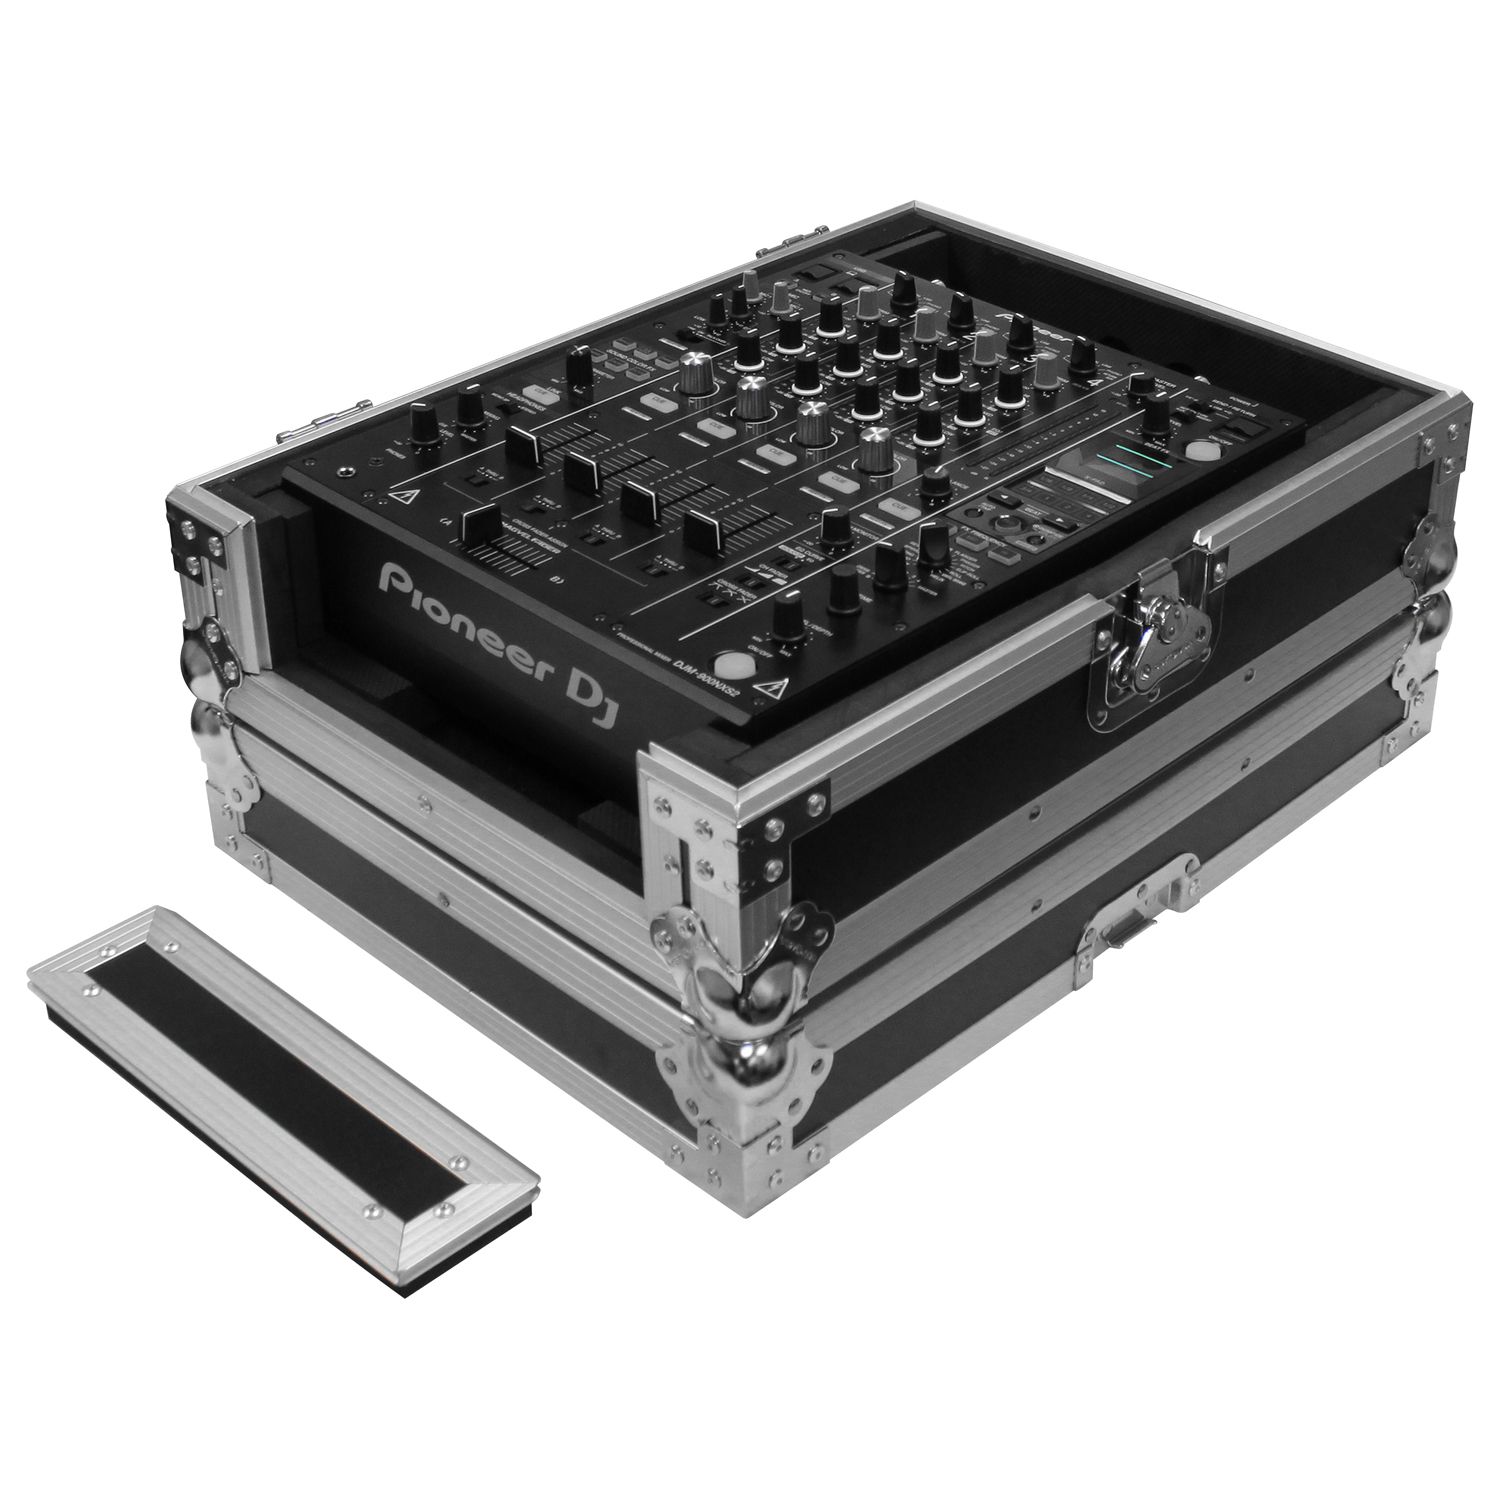 Odyssey Cases FZBB12 New 12" DJ Battle Tray For Setting Up Mixer With Two Cases 